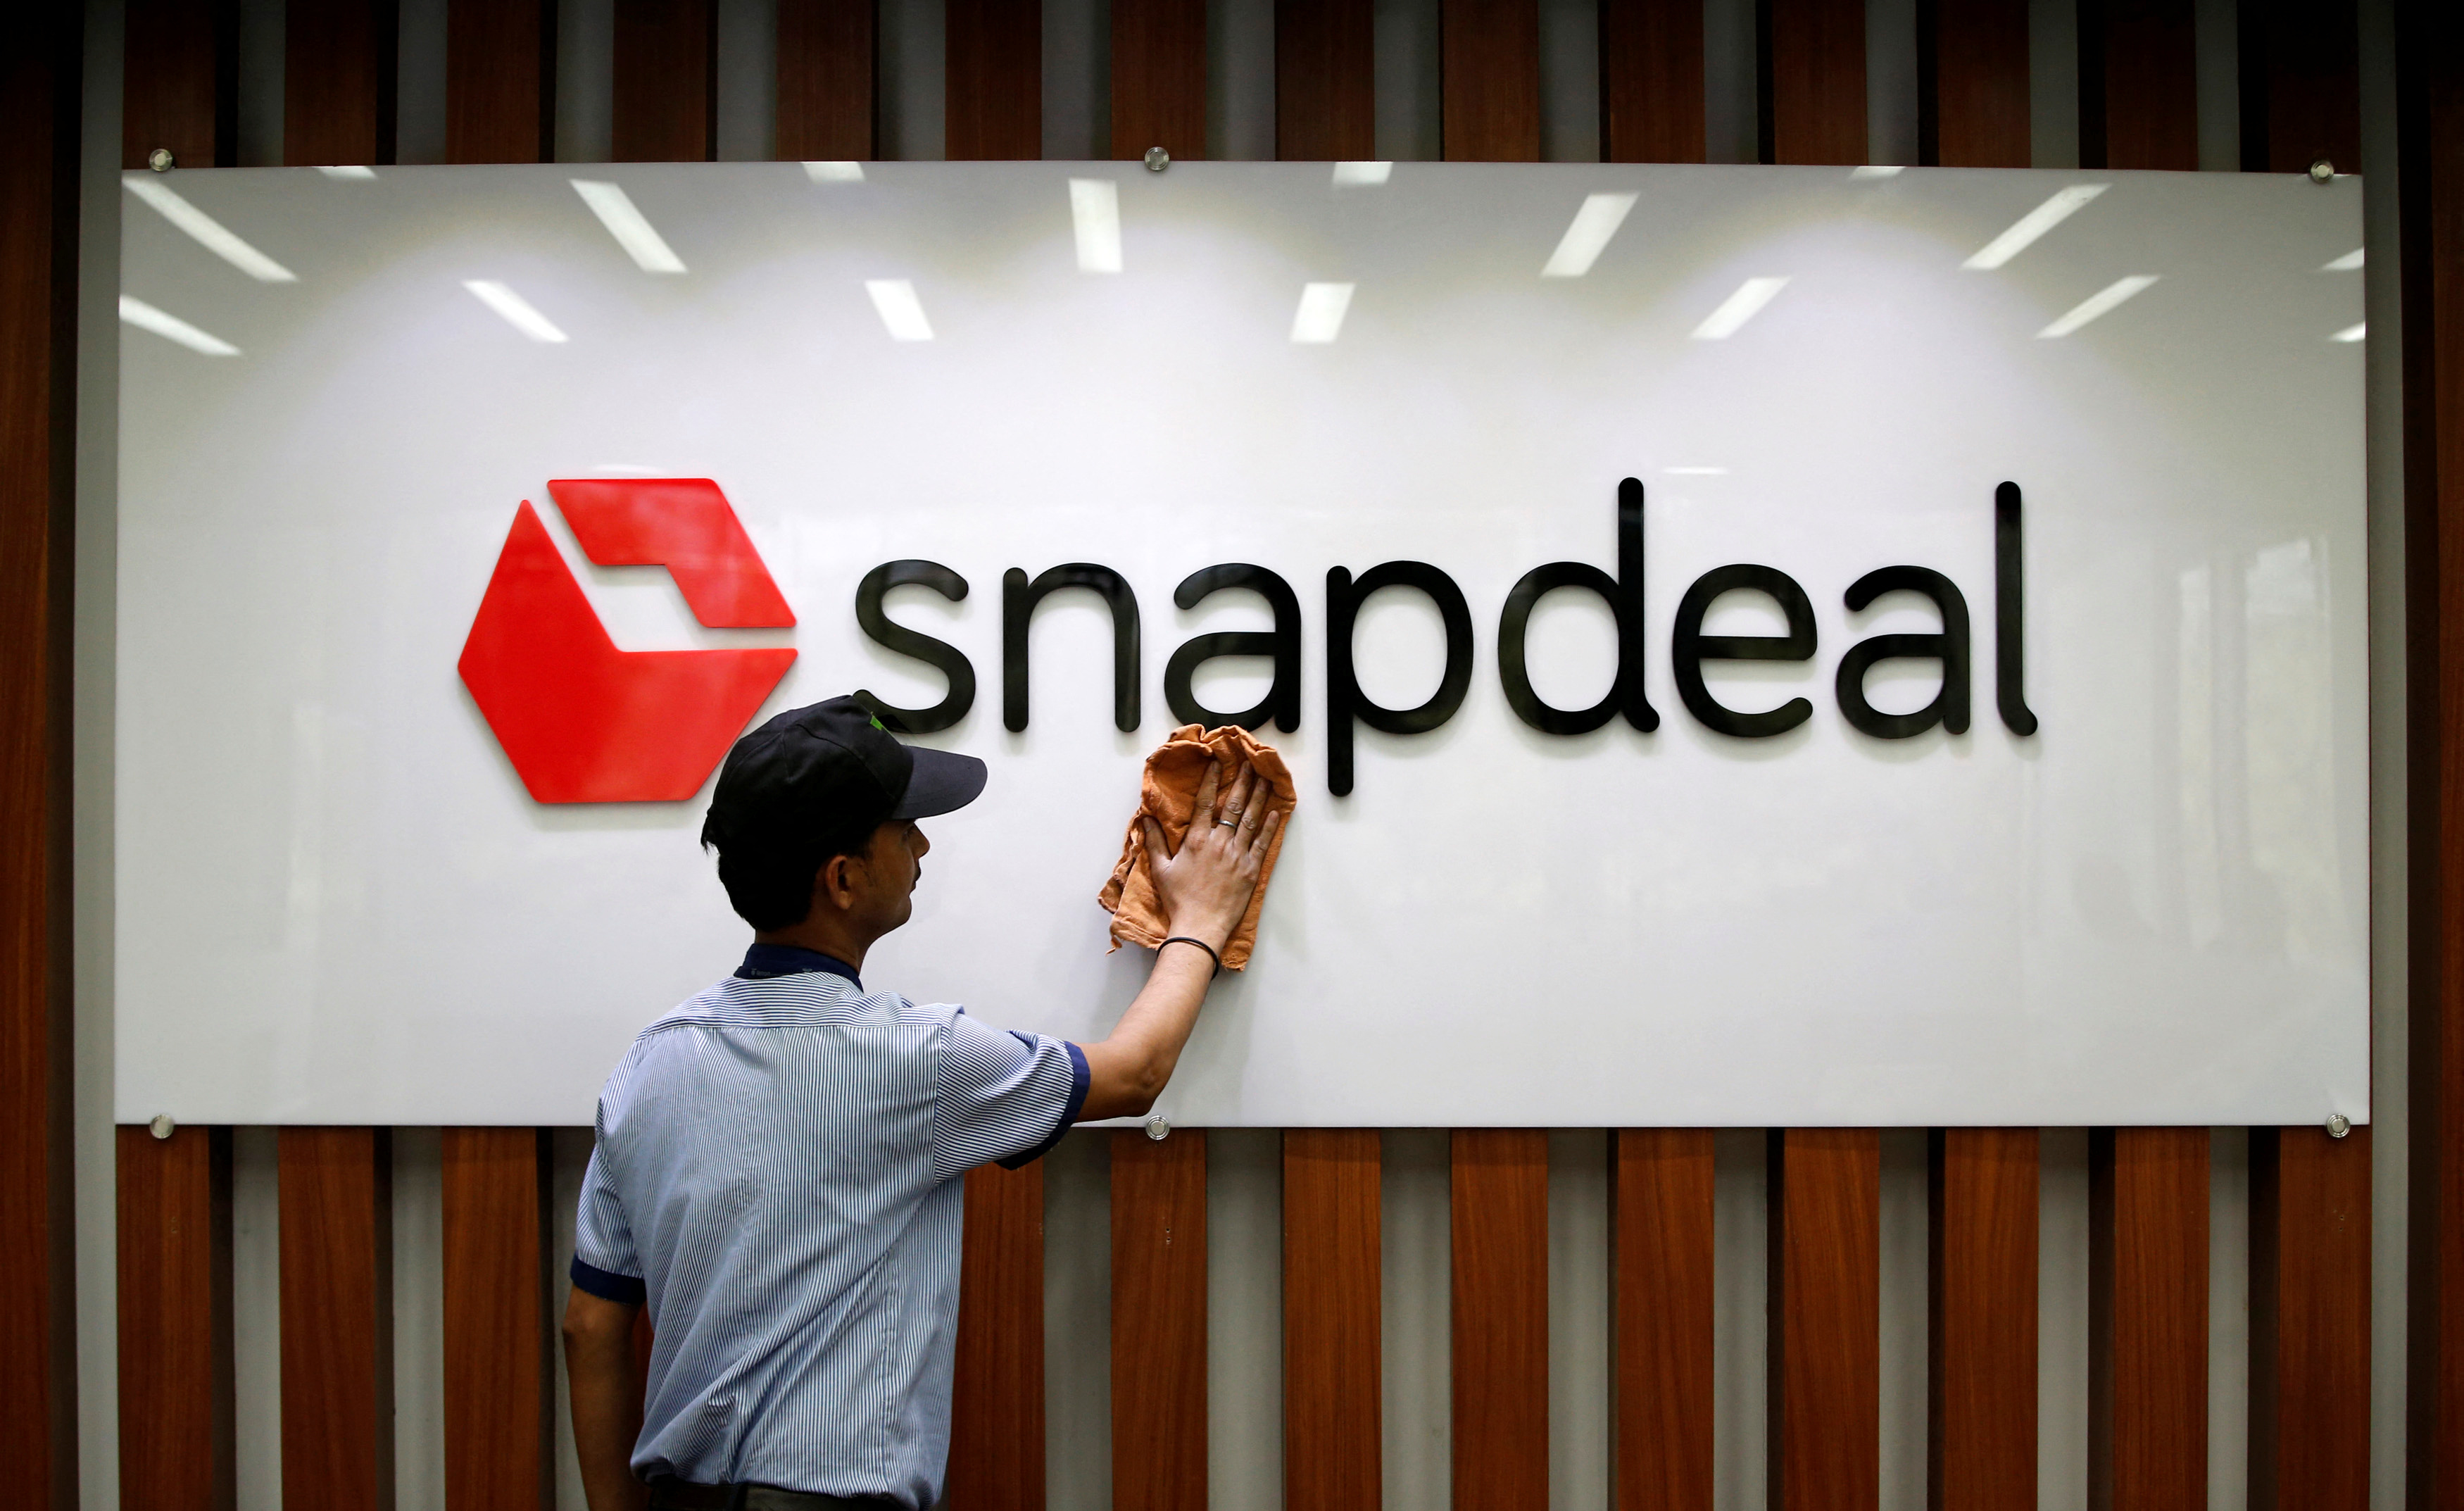 An employee cleans a Snapdeal logo at its headquarters in Gurugram